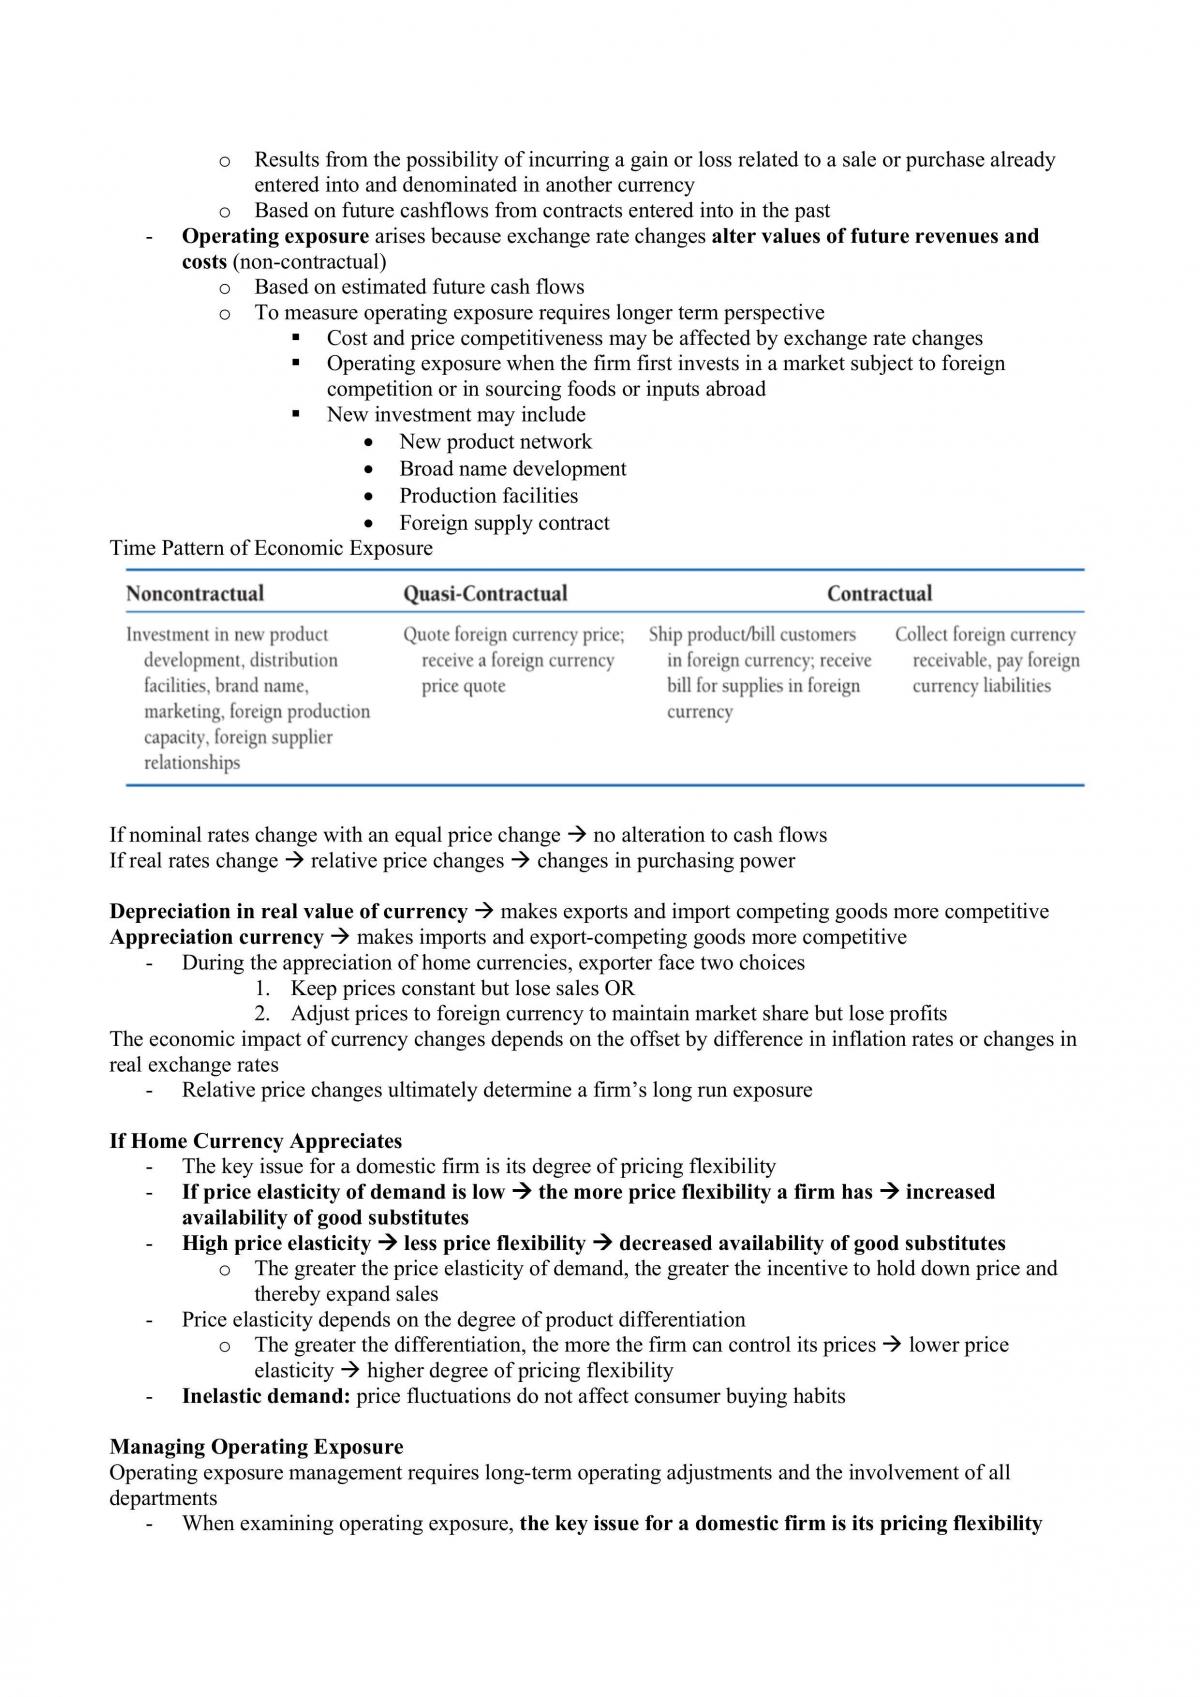 Study Notes for International Business Finance - Page 24